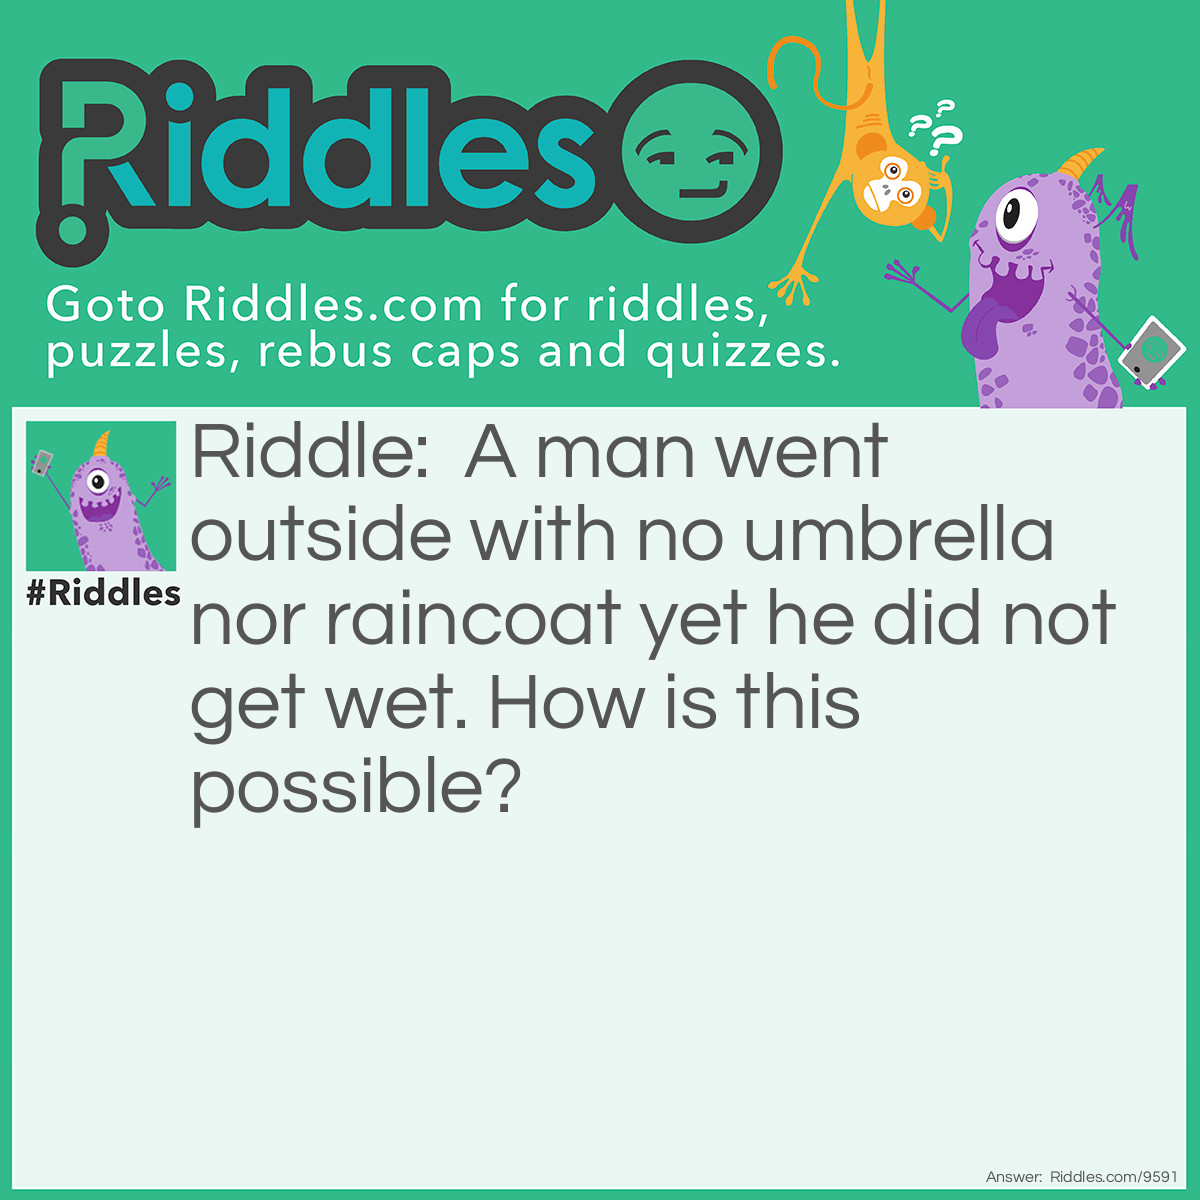 Riddle: A man went outside with no umbrella nor raincoat yet he did not get wet. How is this possible? Answer: It wasn't raining!